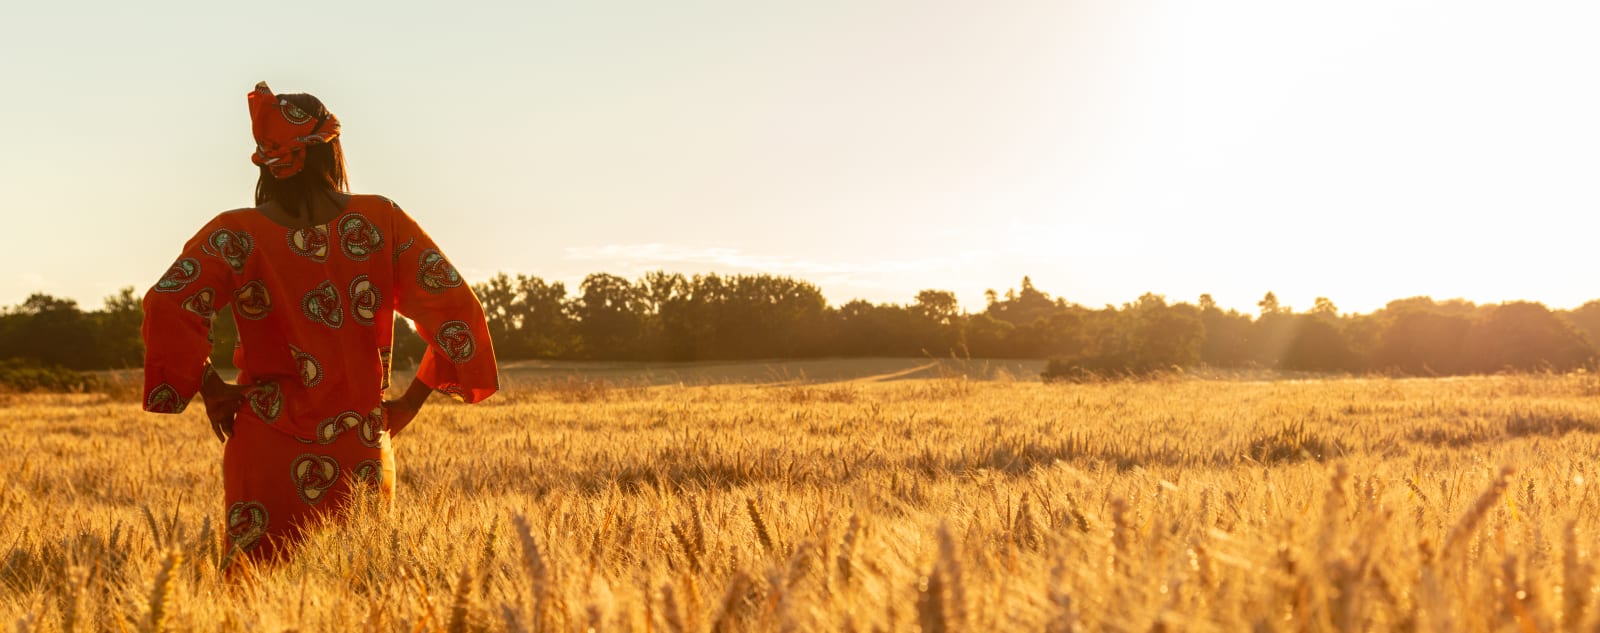 A woman in a red dress looking out into a wheat field at sunset.